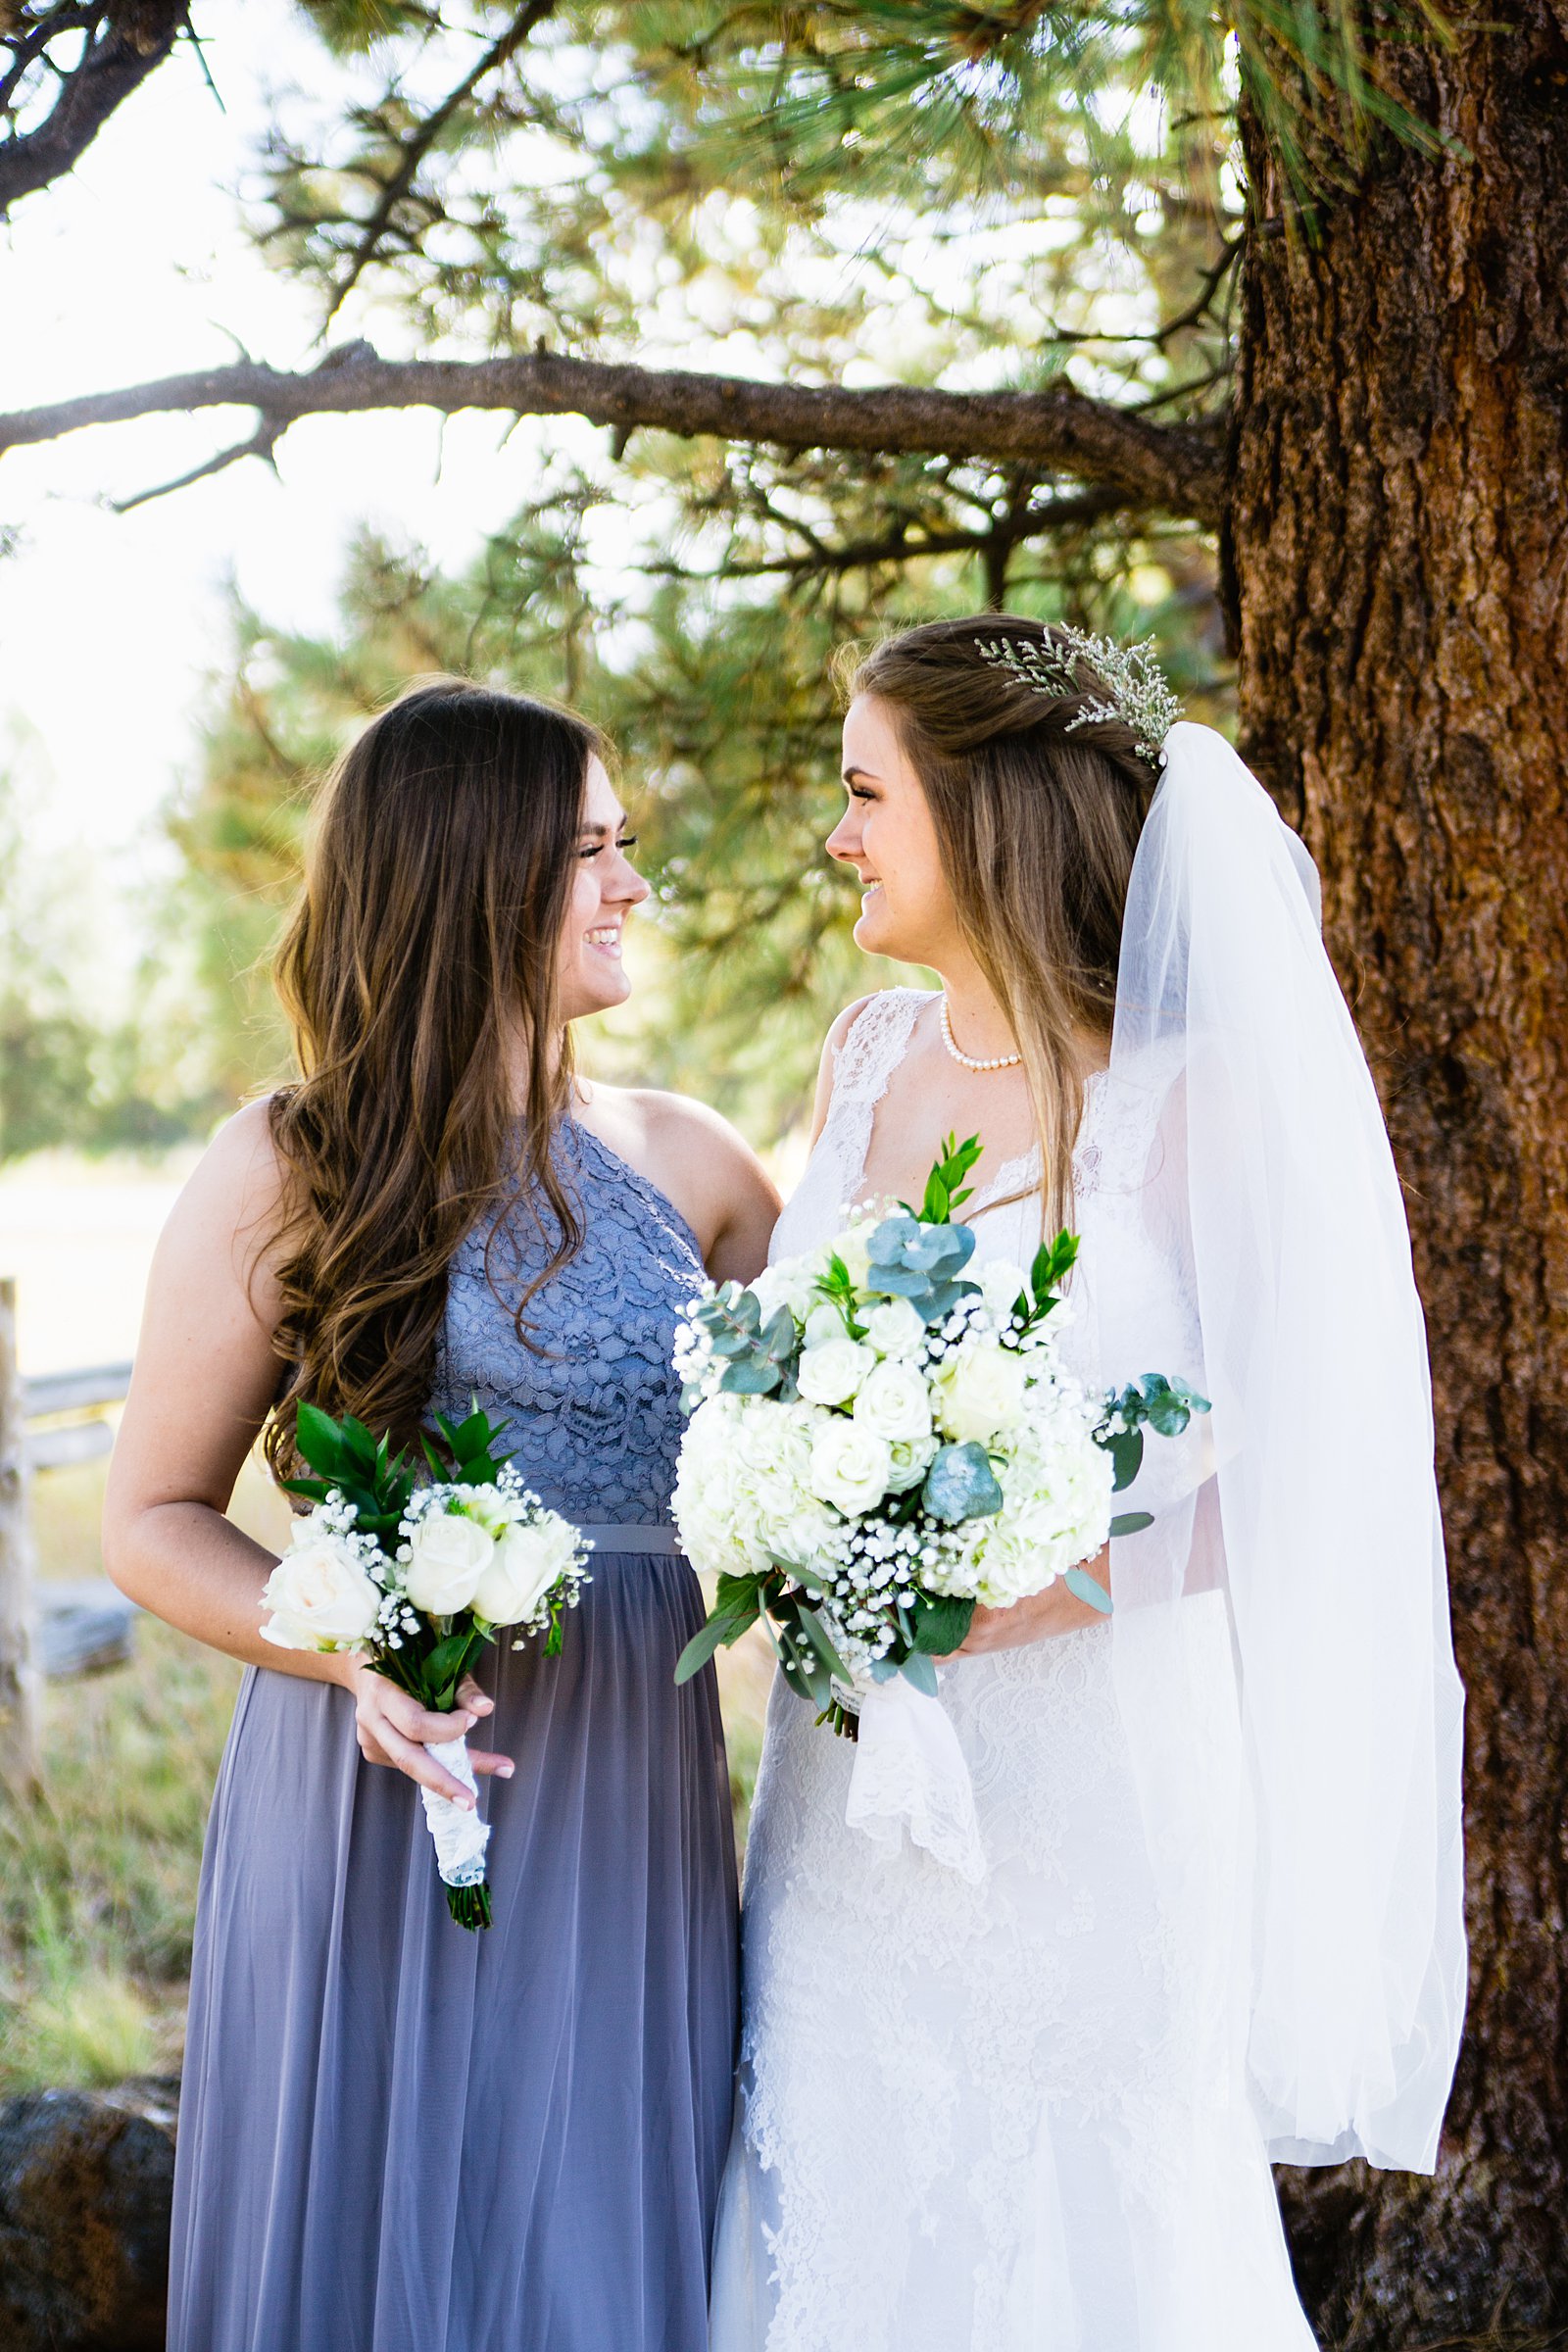 Bride and bridesmaids laughing together at Chapel of the Holy Dove wedding by Flagstaff wedding photographer PMA Photography.